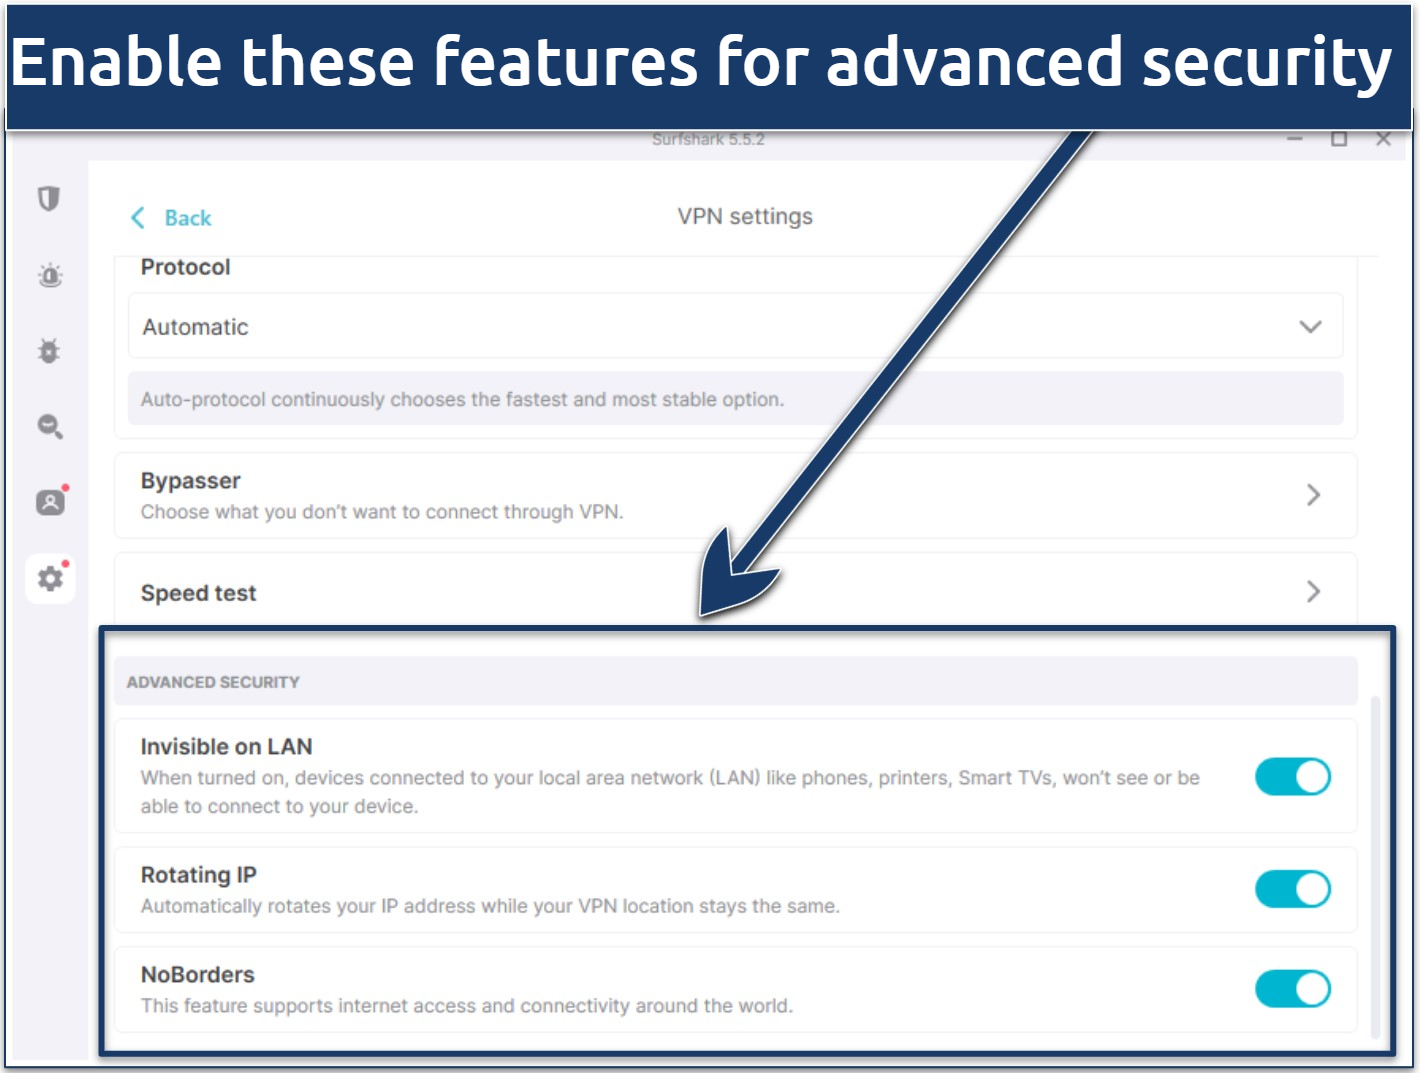 Screenshot of Surfshark's app interface showing its advanced security options